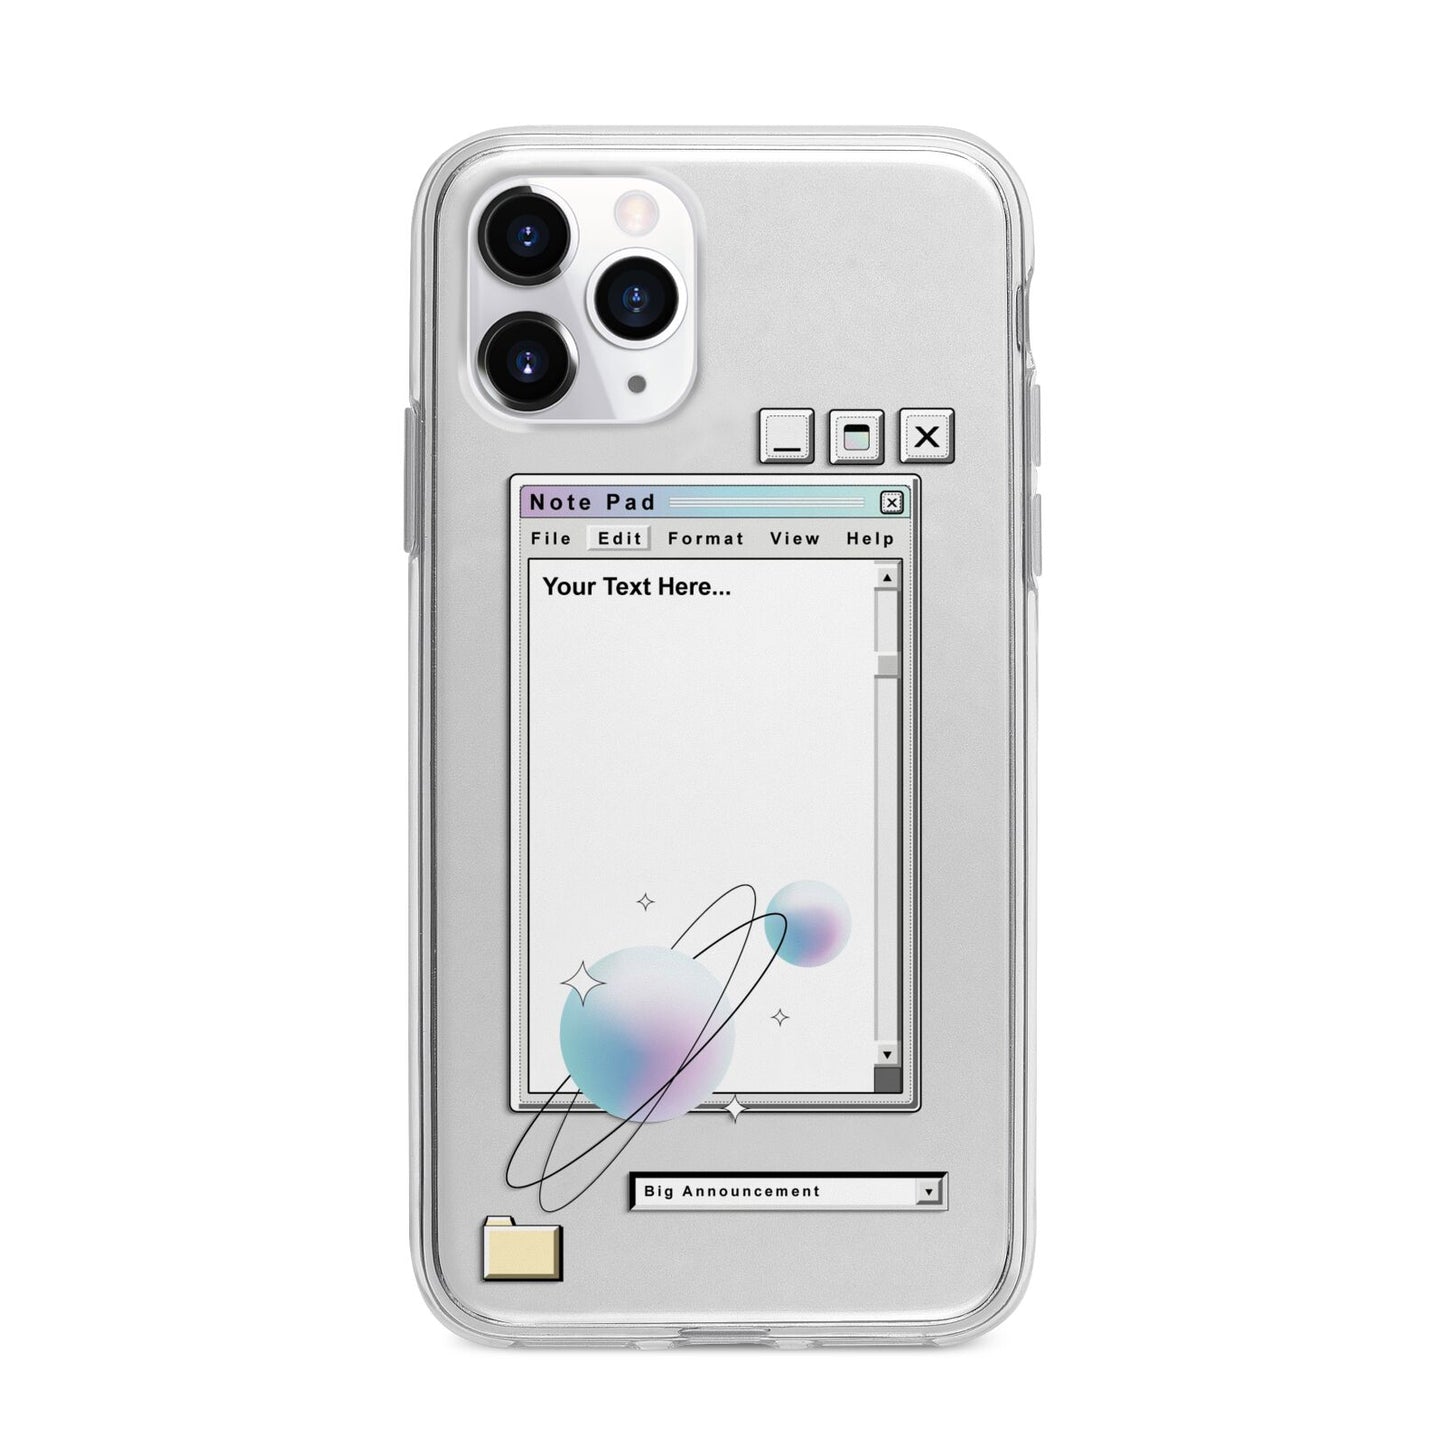 Retro Note Pad Apple iPhone 11 Pro in Silver with Bumper Case